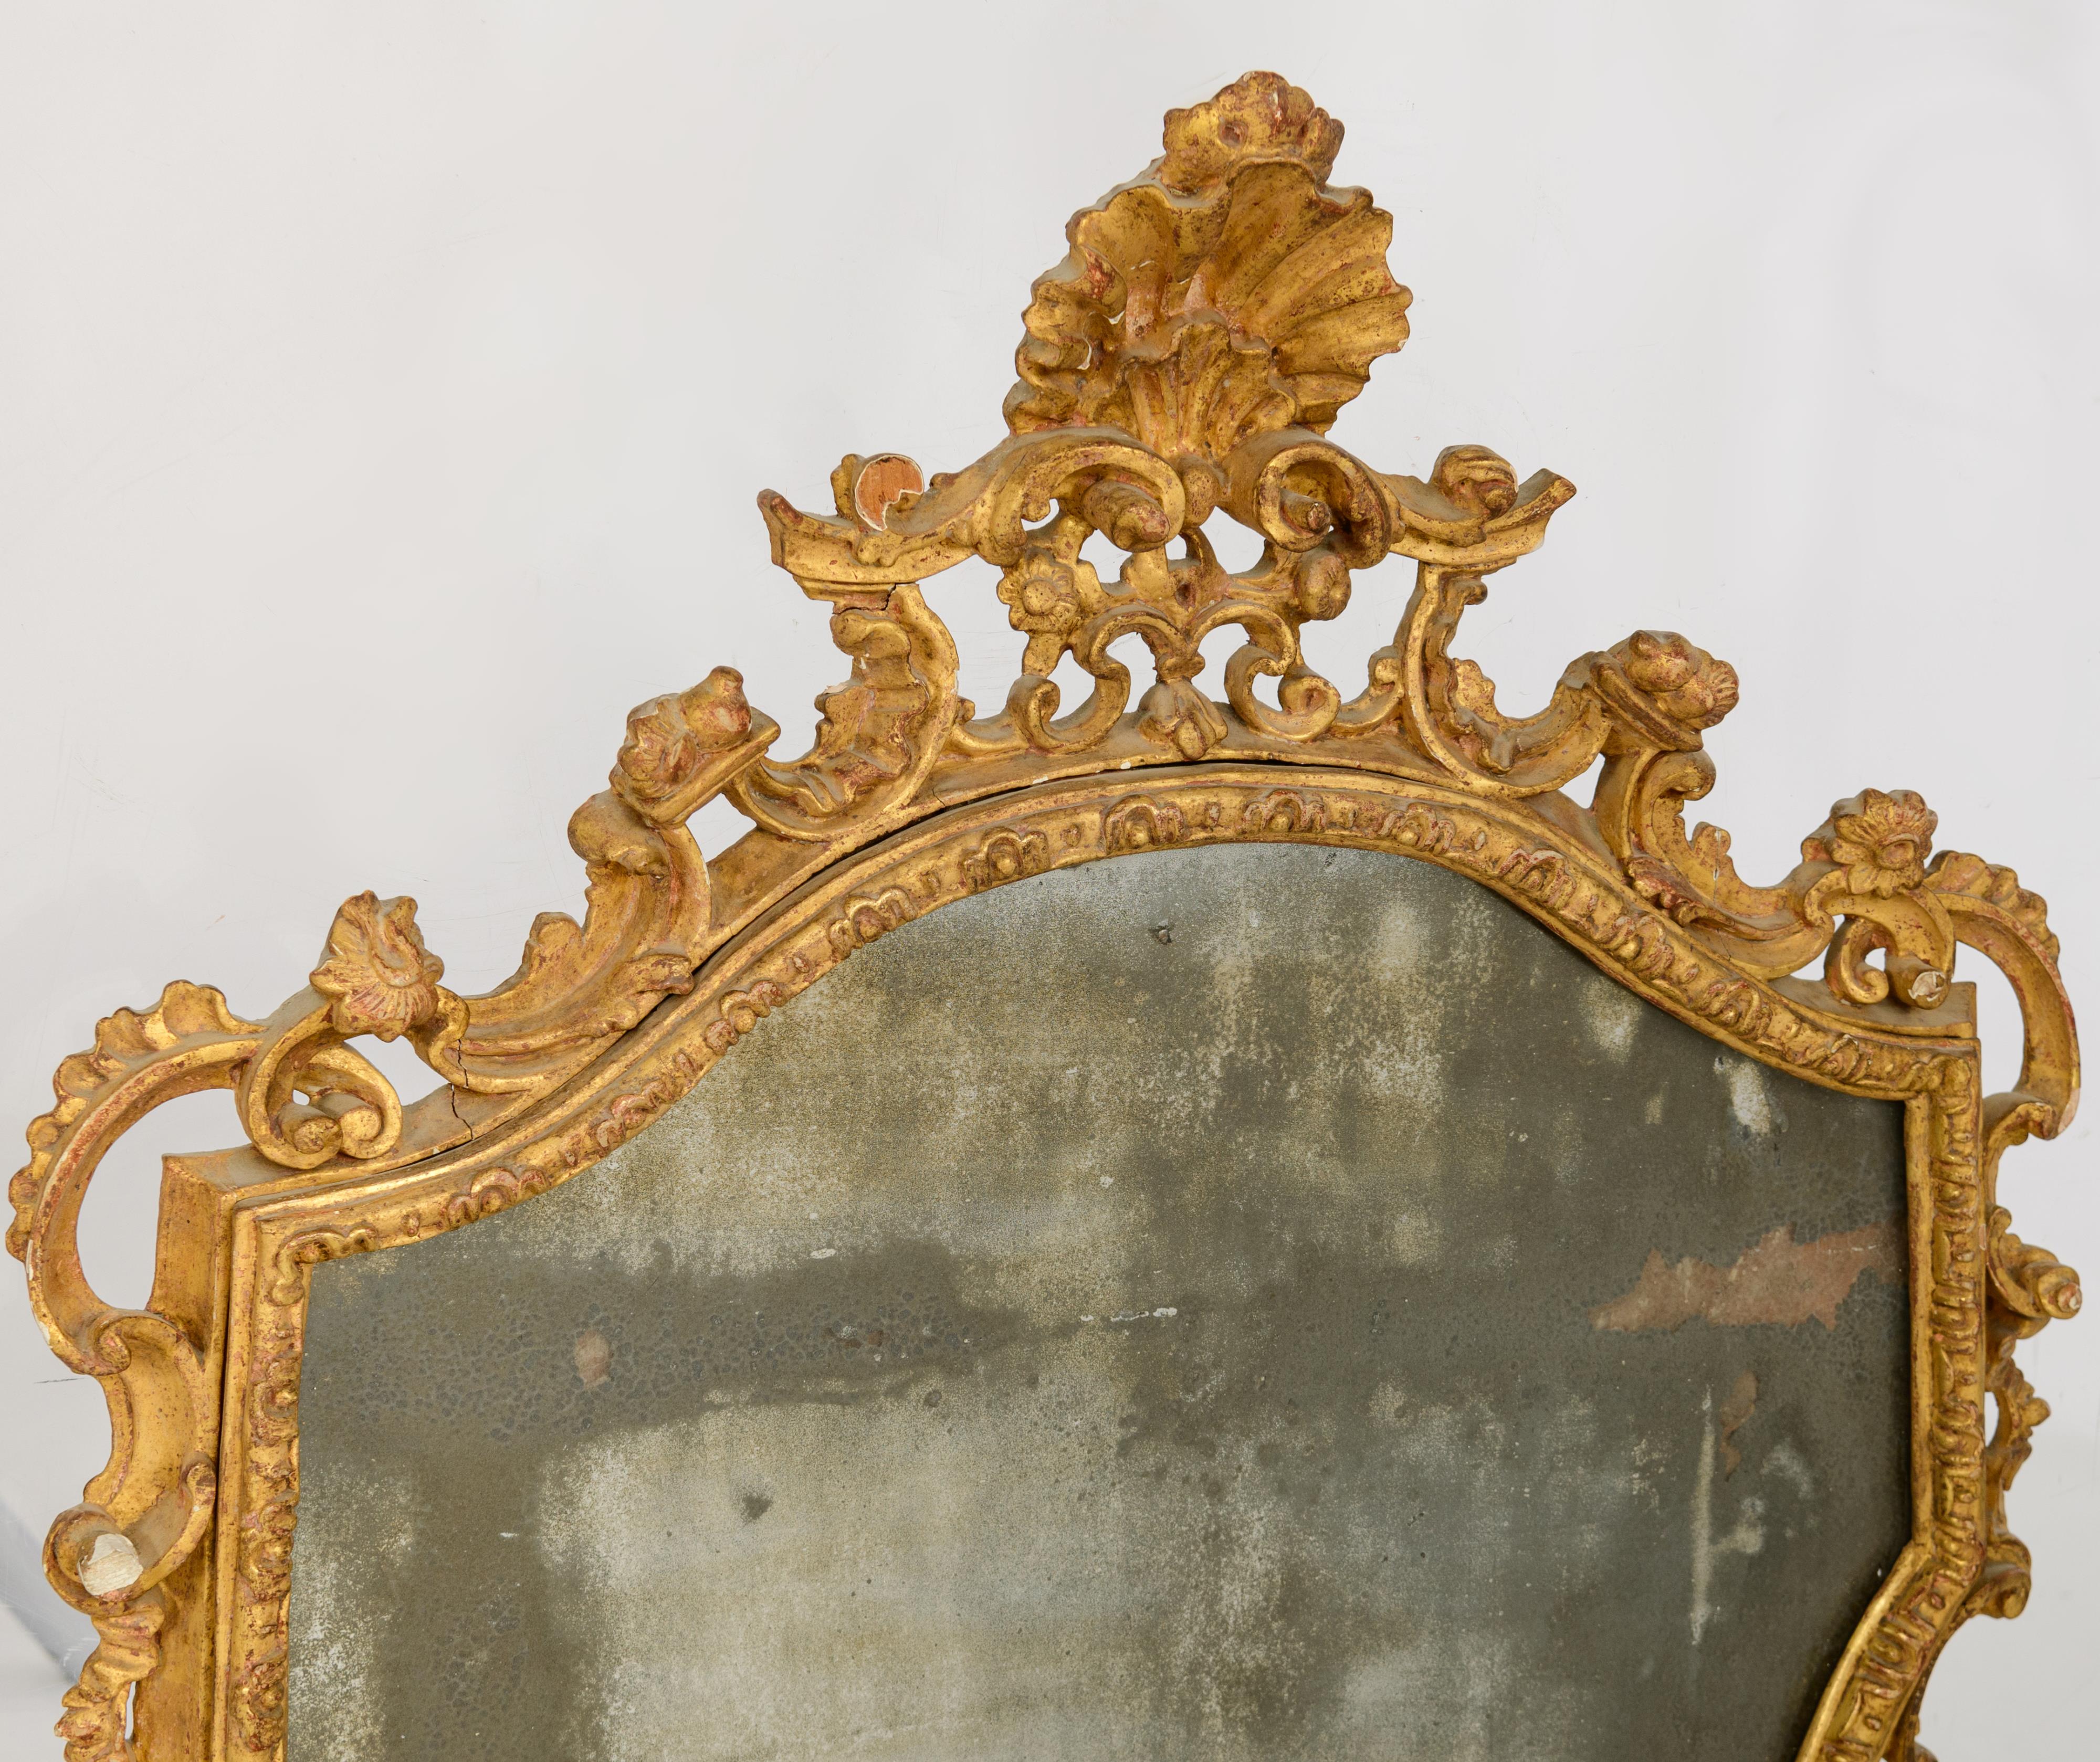 A gilt and finely carved Baroque Venetian wall mirror, decorated with shells and volutes, 18thC, H 1 - Image 3 of 8